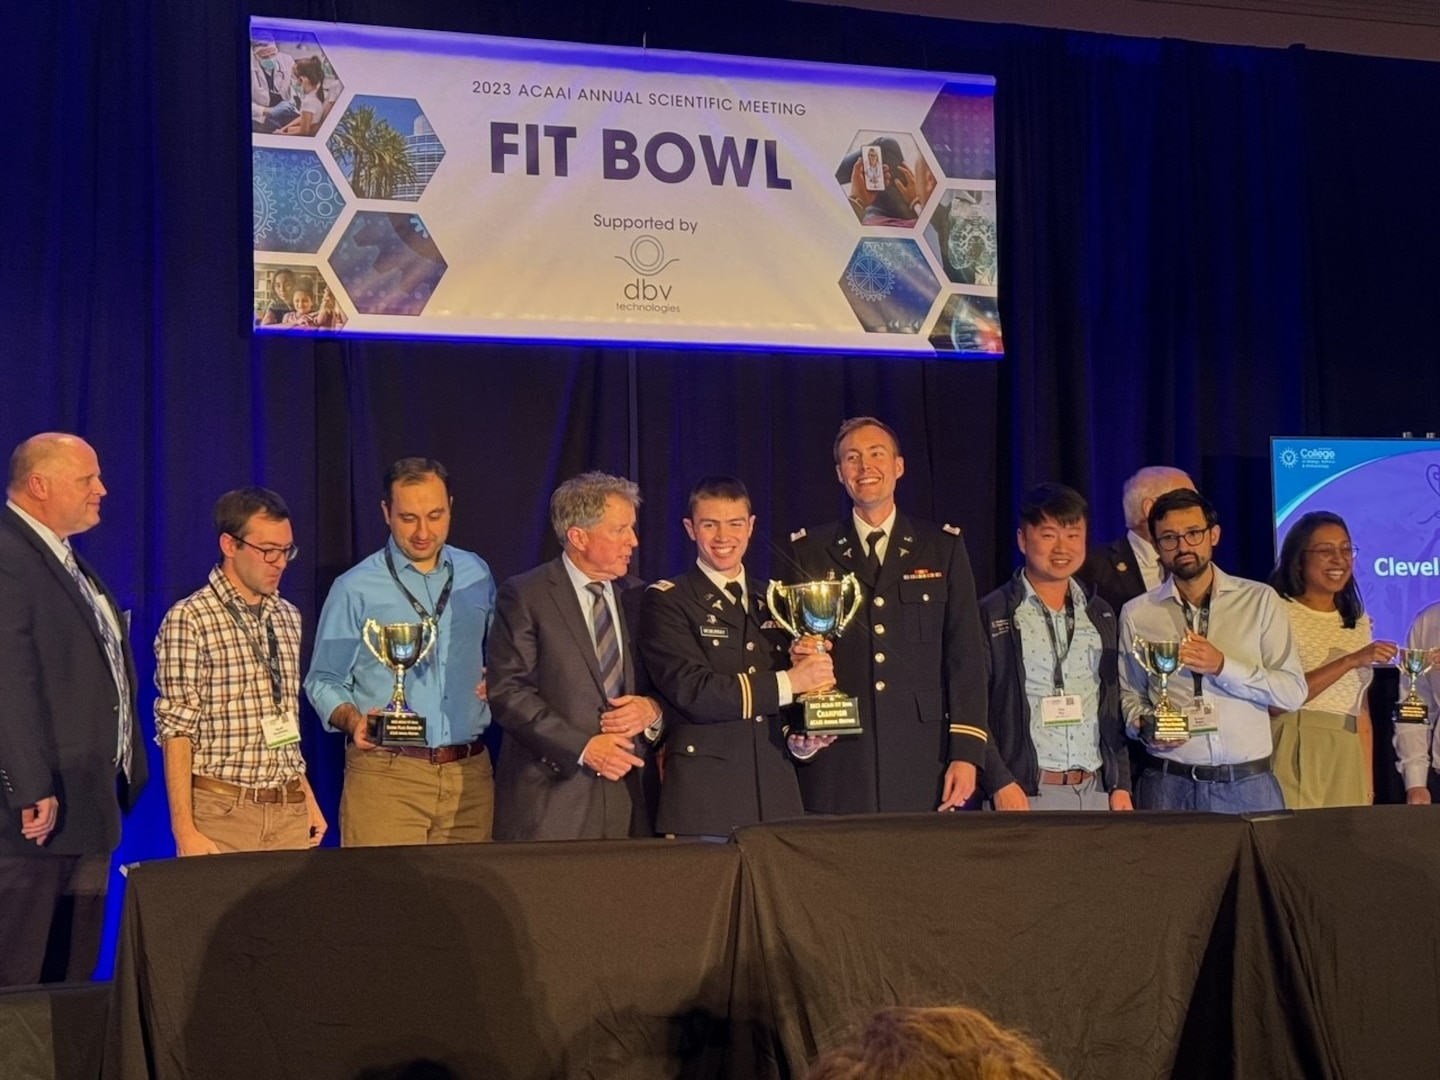 Army Capts. (Drs.) Jerry McMurray and Andrew Weskamp (center), from the National Capital Consortium and Walter Reed, hold the 2023 Champion Trophy from the FIT Bowl they earned Nov. 11 during the competition among allergy/immunology fellowship programs from across the country held in Anaheim, California.